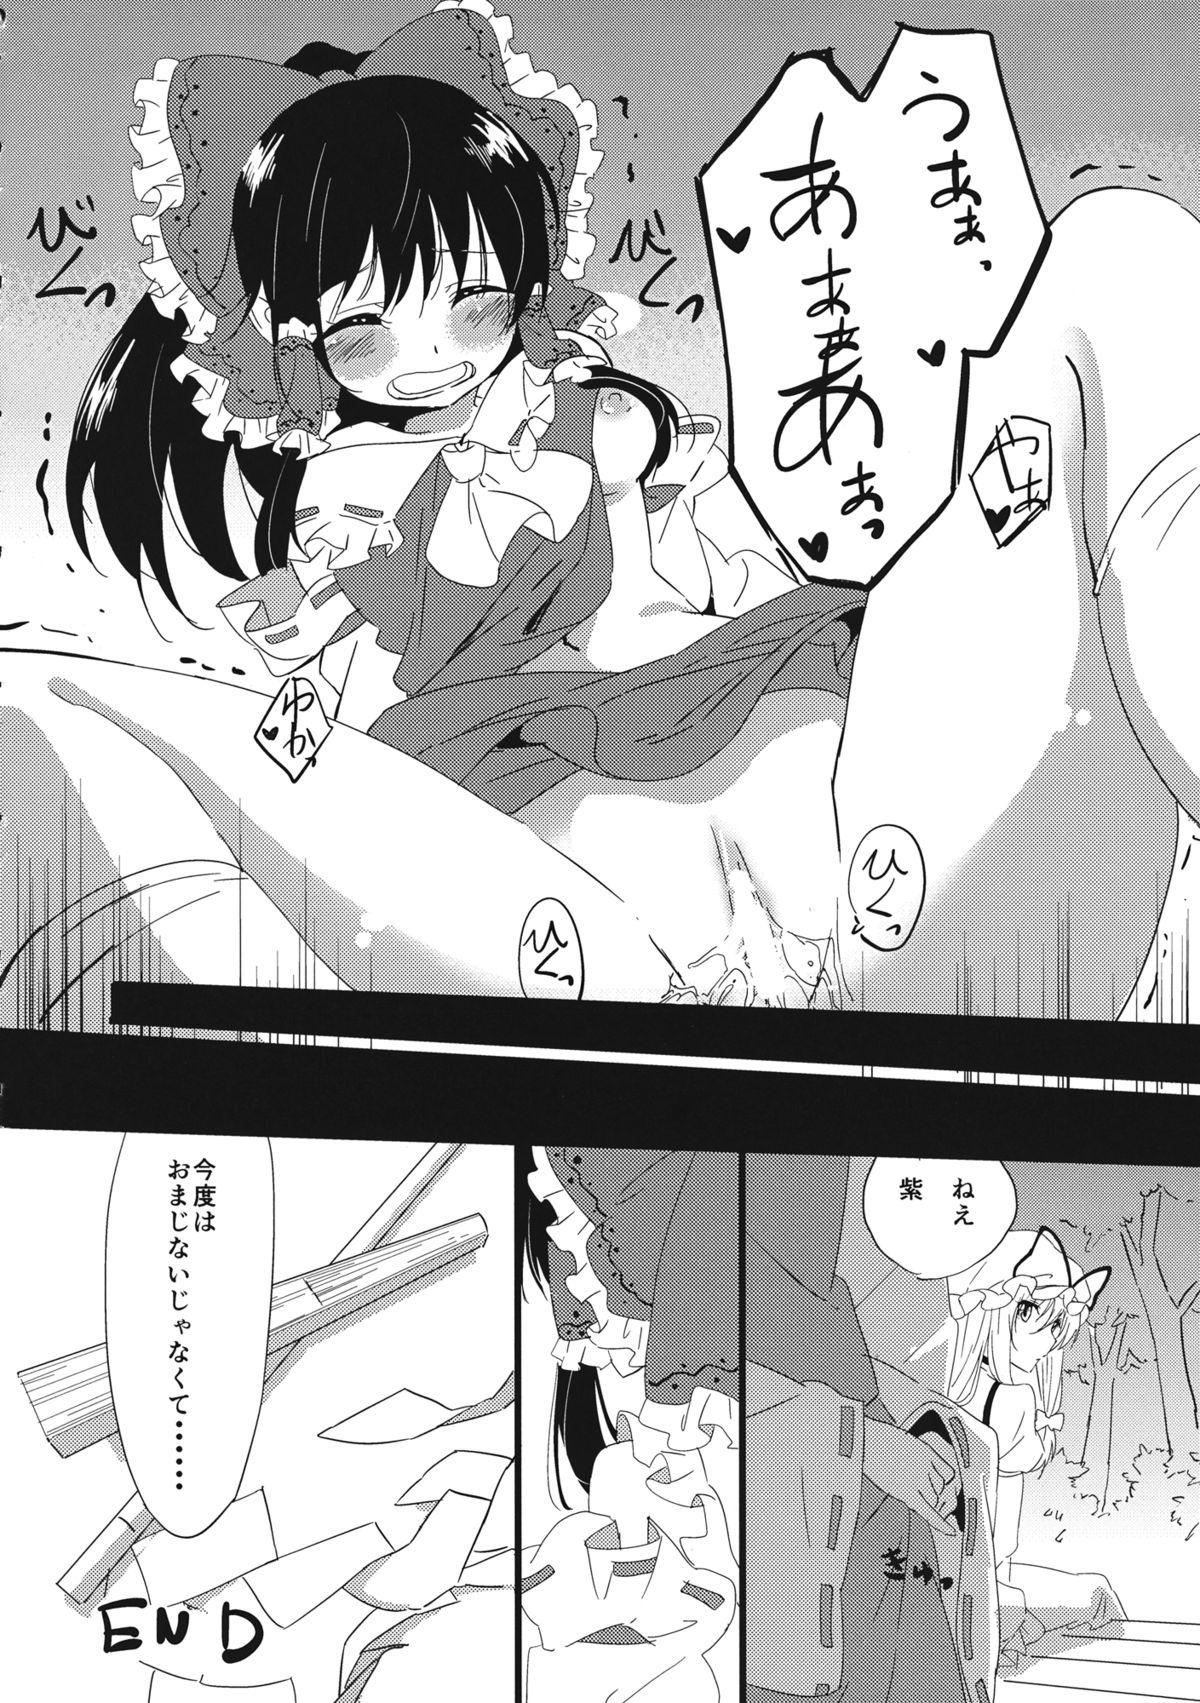 Machine Touhou Muchi Shichu Goudou - Toho joint magazine sex in the ignorant situations - Touhou project Asian - Page 8